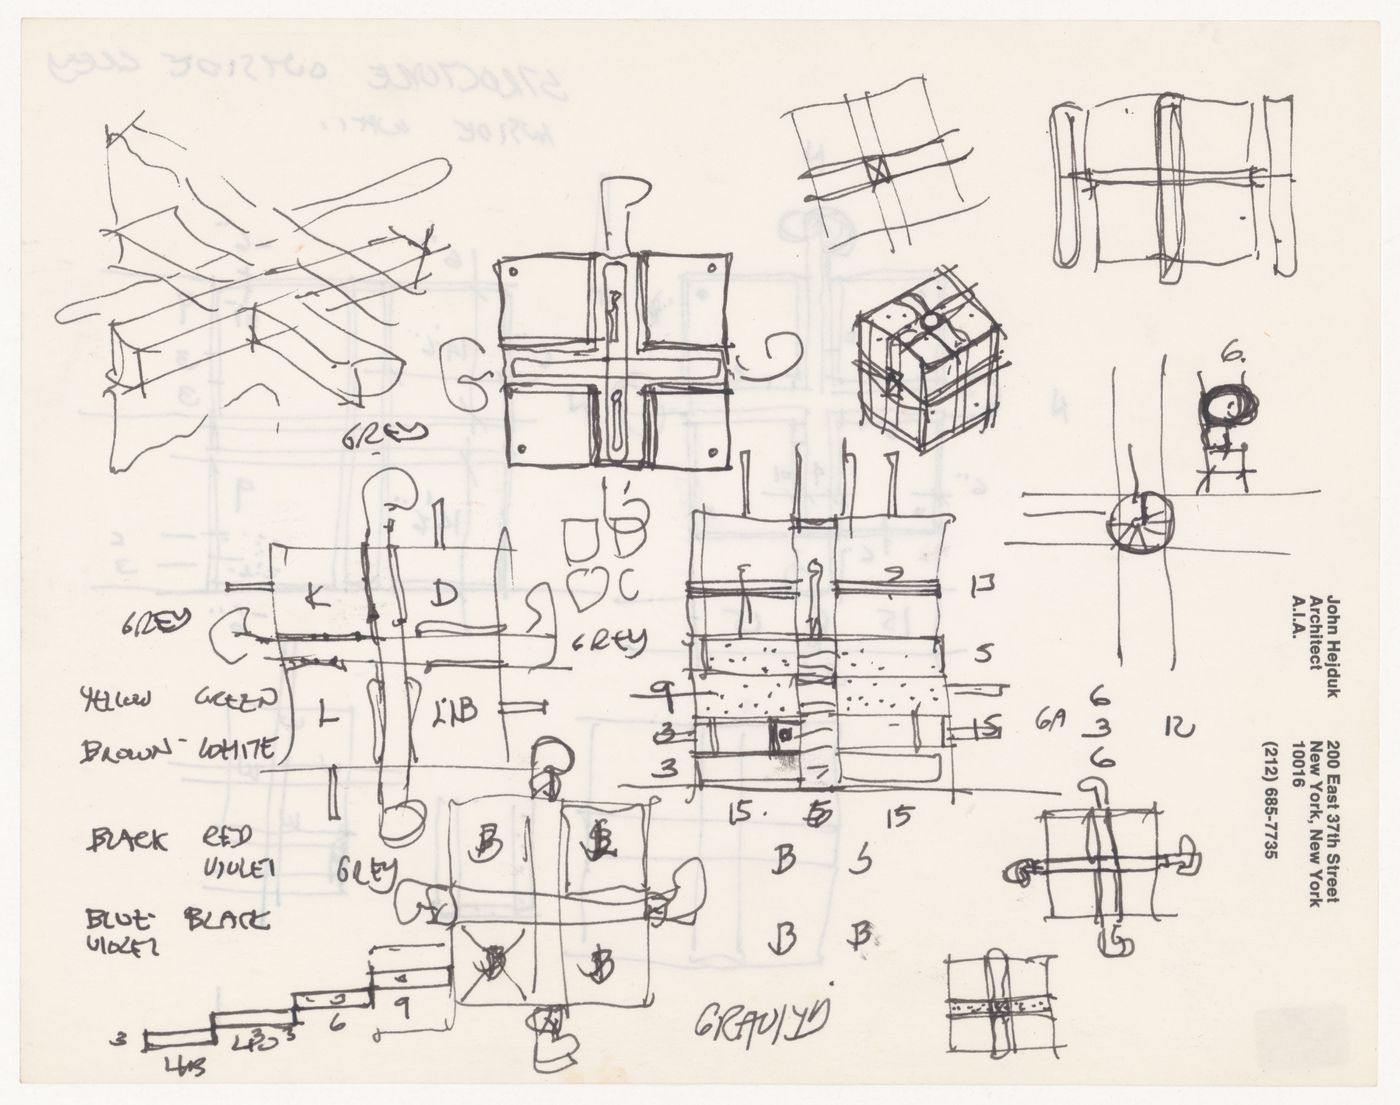 Sketches and notes for Todre House